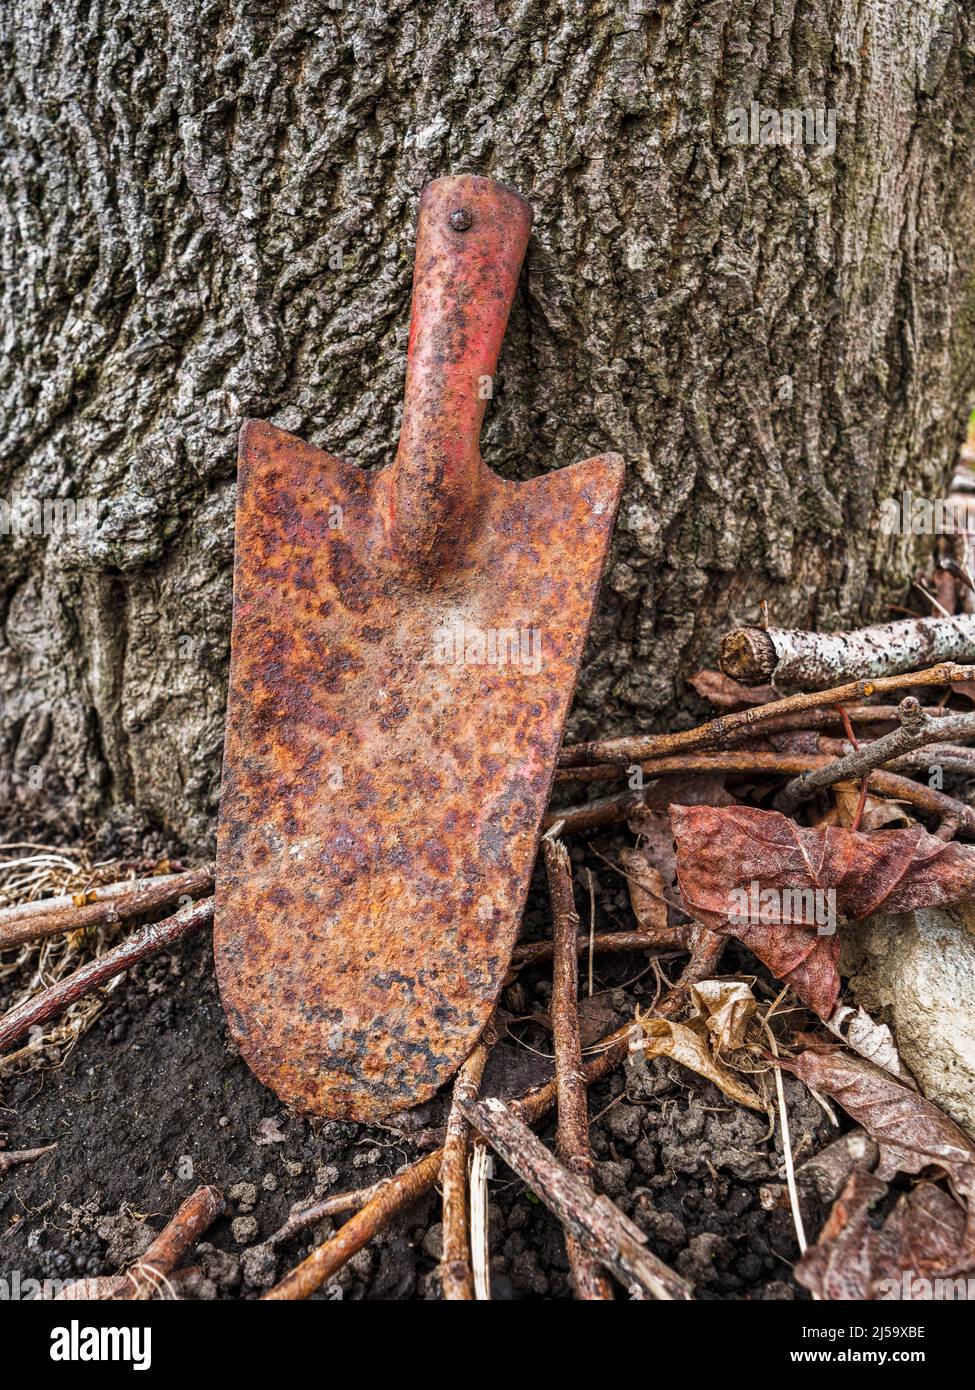 An old rusty trowel rests against a tree trunk surrounded by vegetation, UK Stock Photo